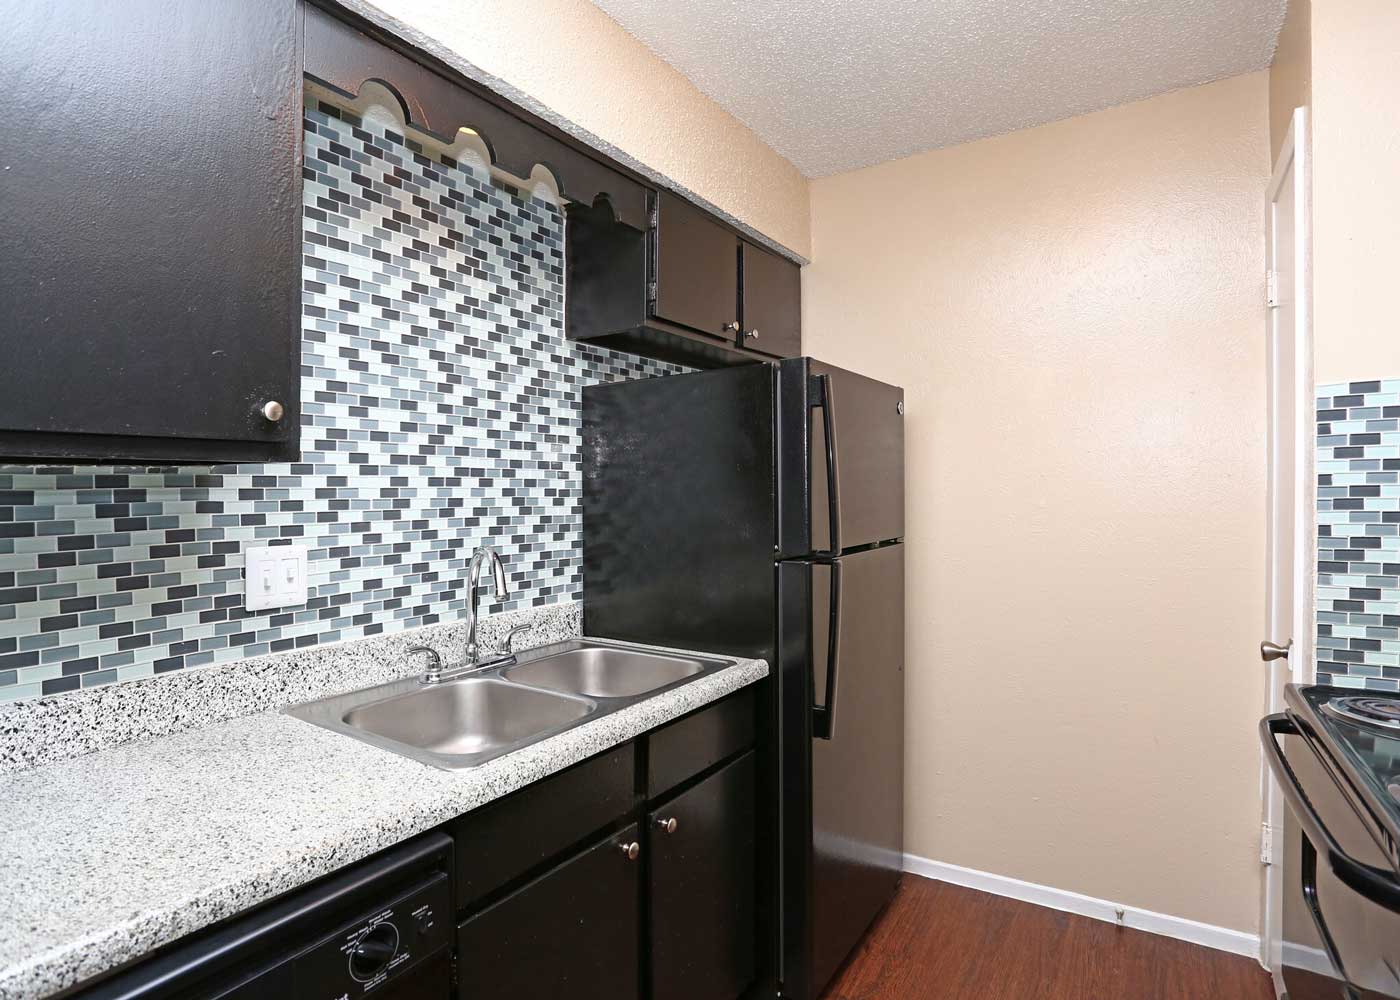 All Black Kitchen Appliances at The Junction Apartments in Arlington, Texas